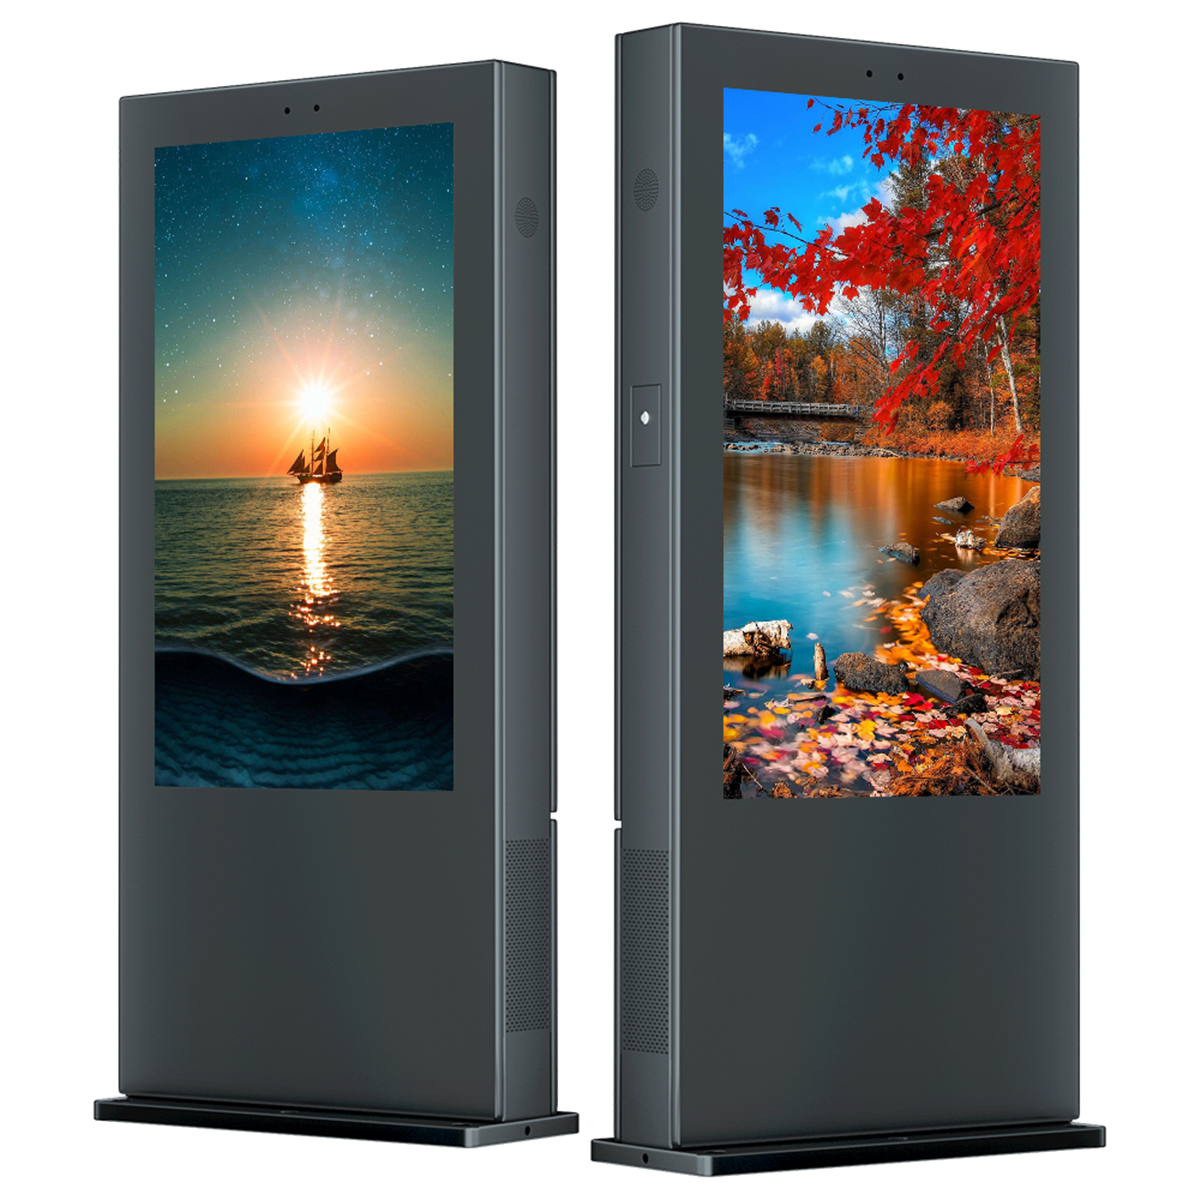 Future trend of outdoor advertising player and outdoor touch screen kiosk